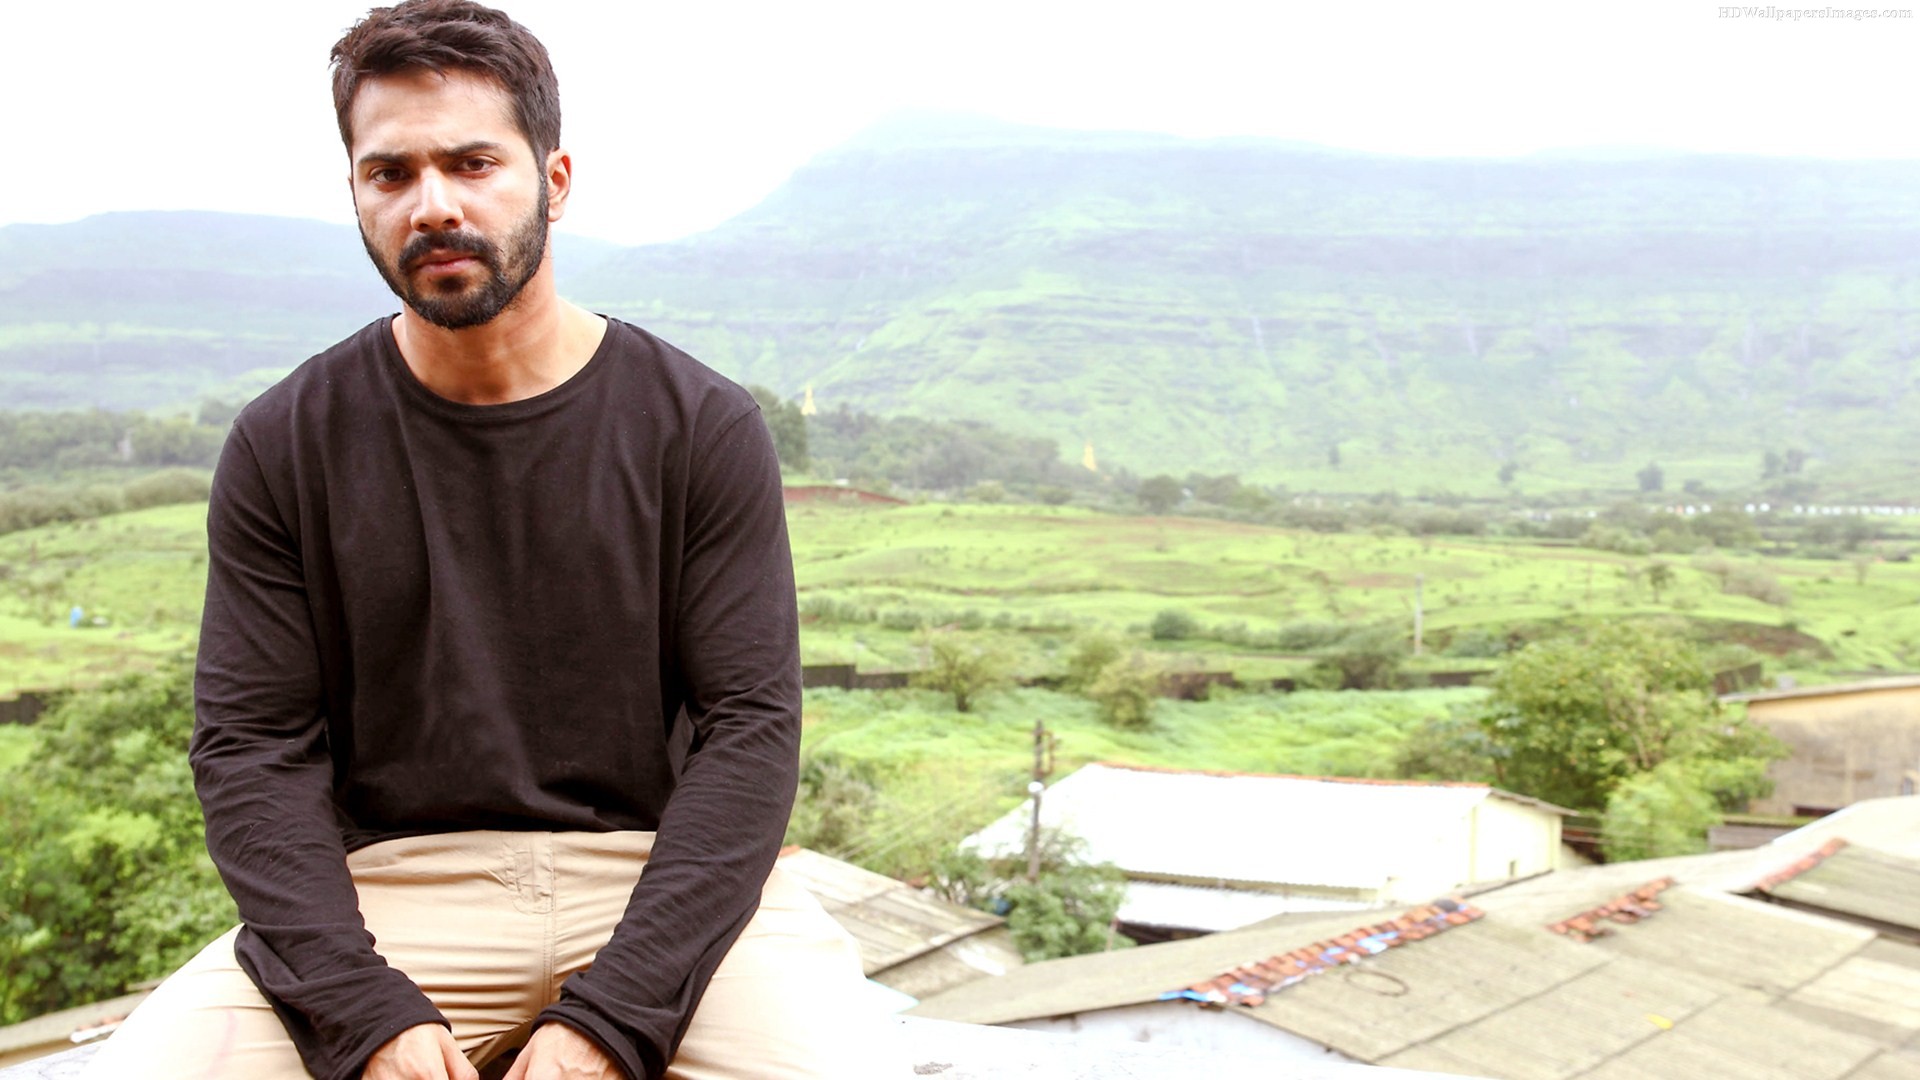 Read on to know why we are so Proud of Varun Dhawan!